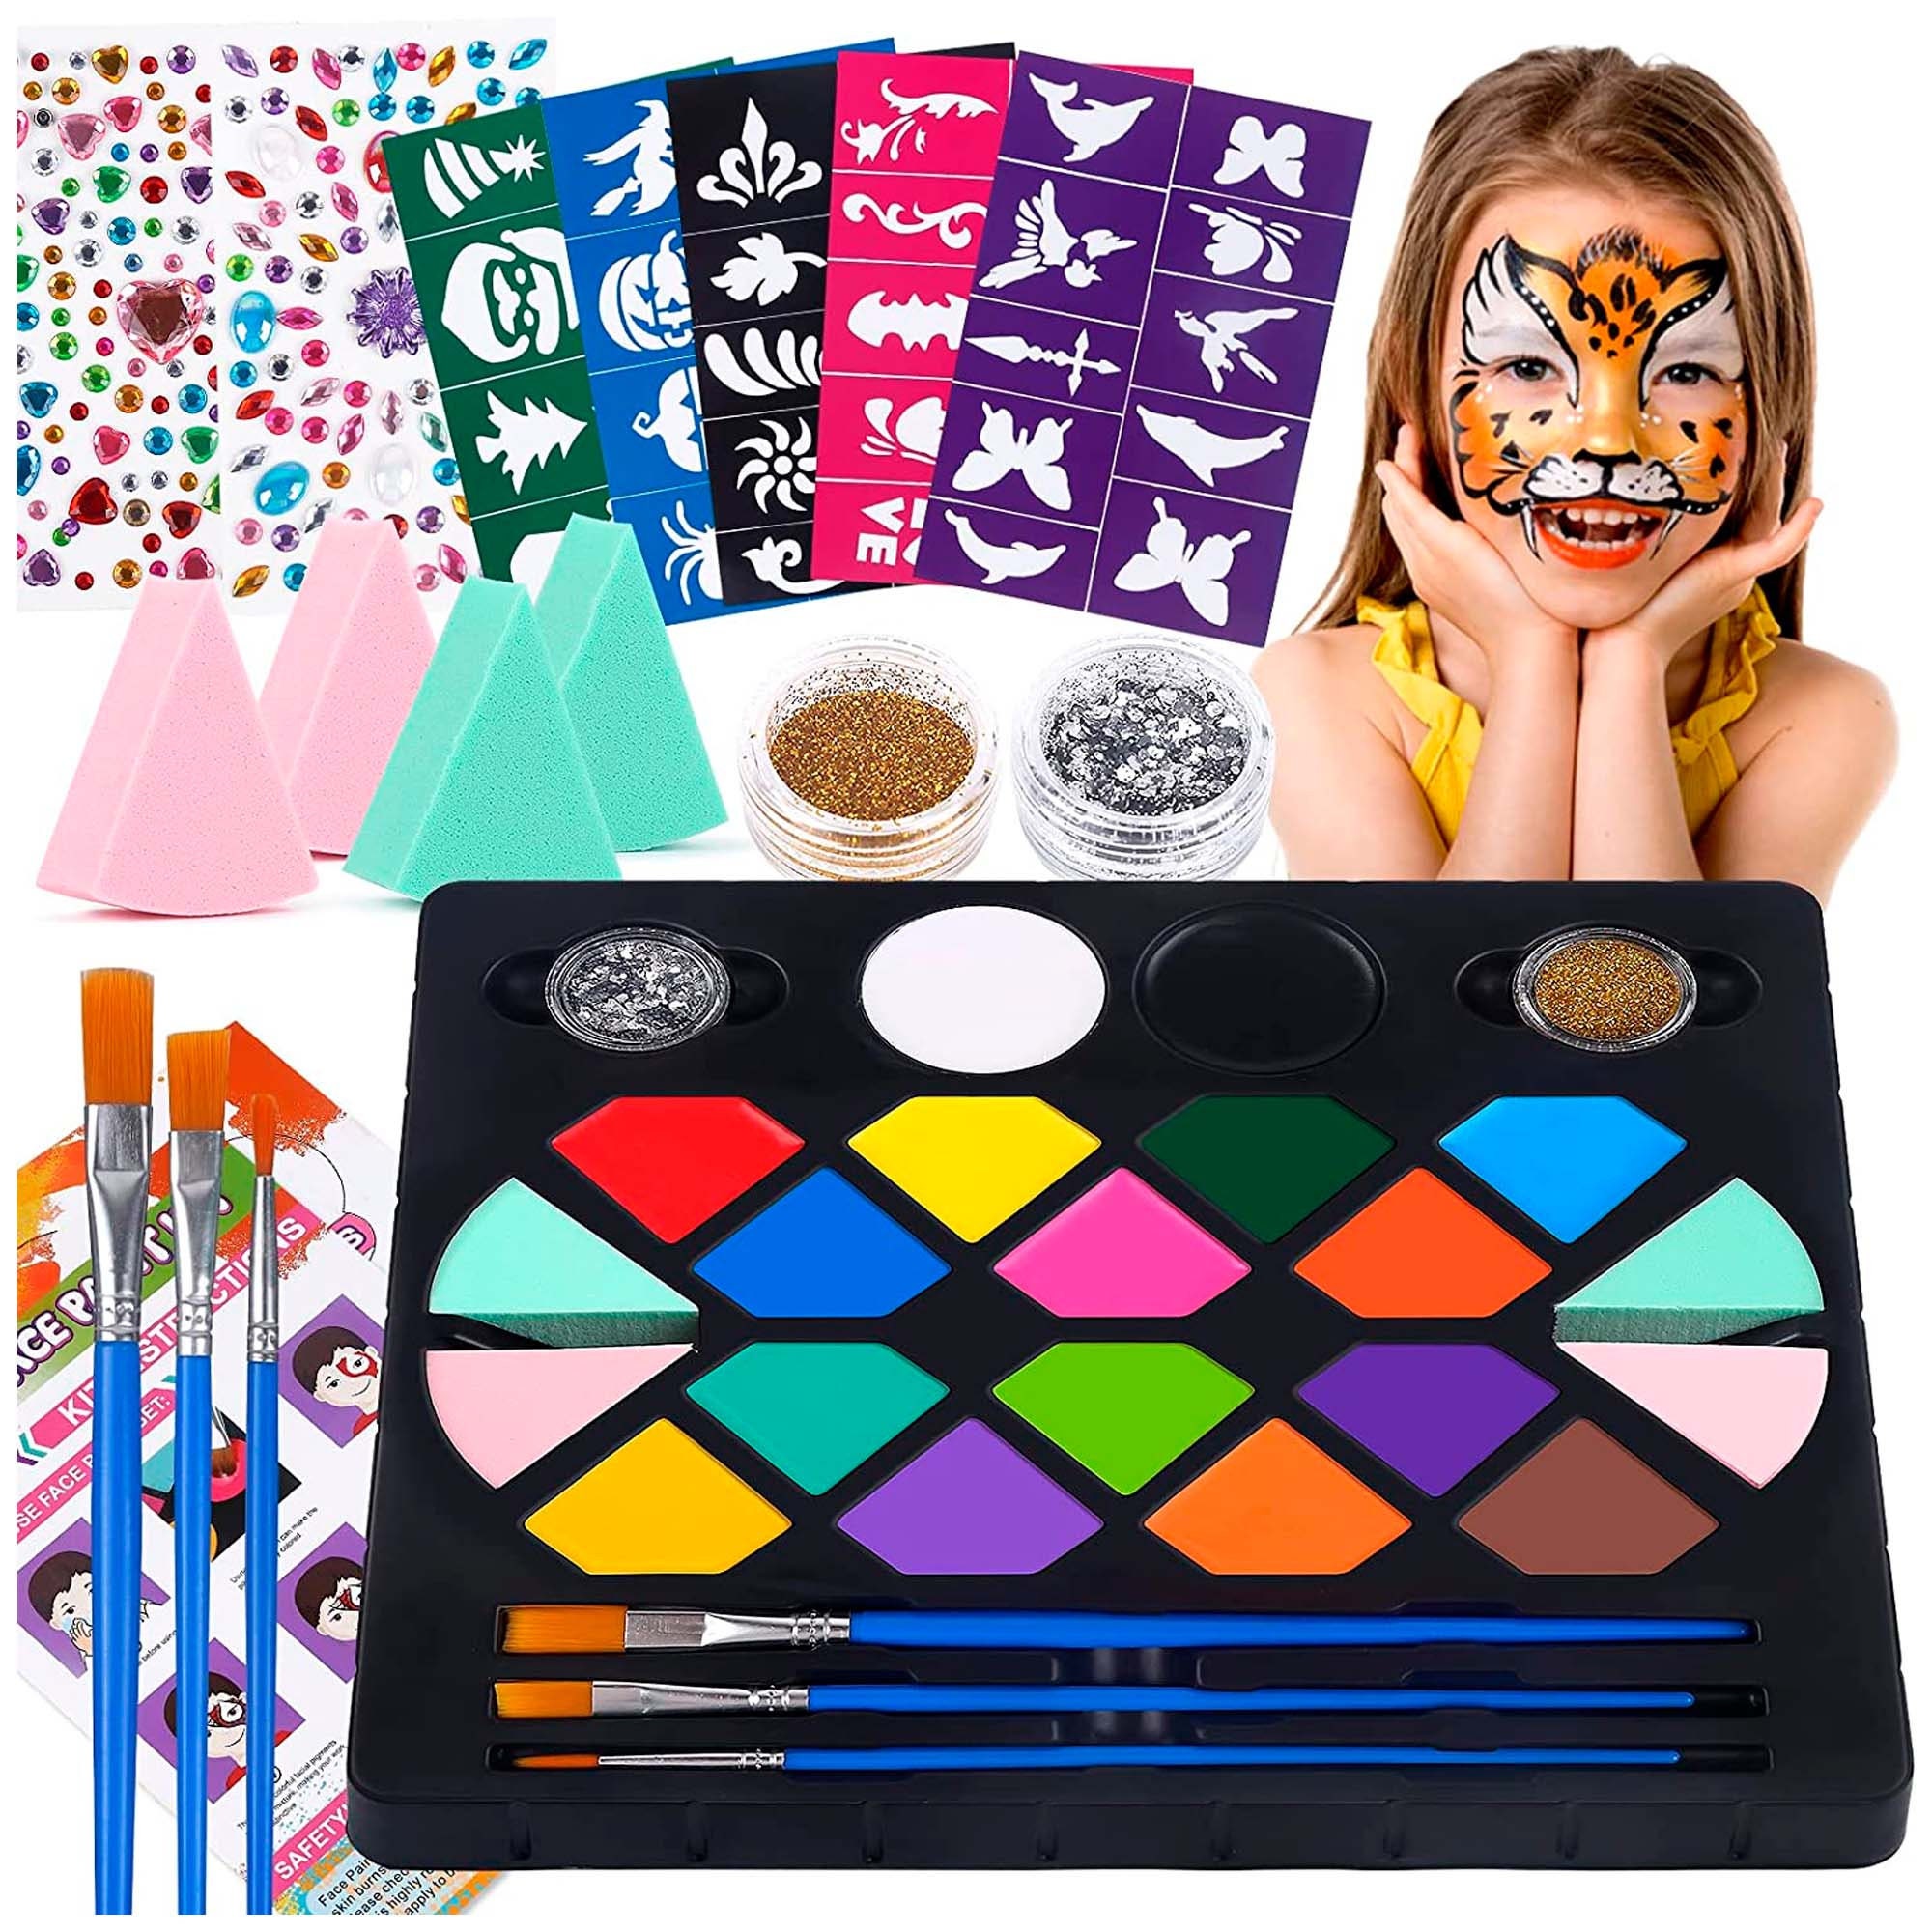 Face Painting Kit For Kids Party - 20 Water Based Non-Toxic Sensitive Skin  Paints 3 Glitters 2 hair chalks combs 3 Paint Brushes 40 Stencils for kids